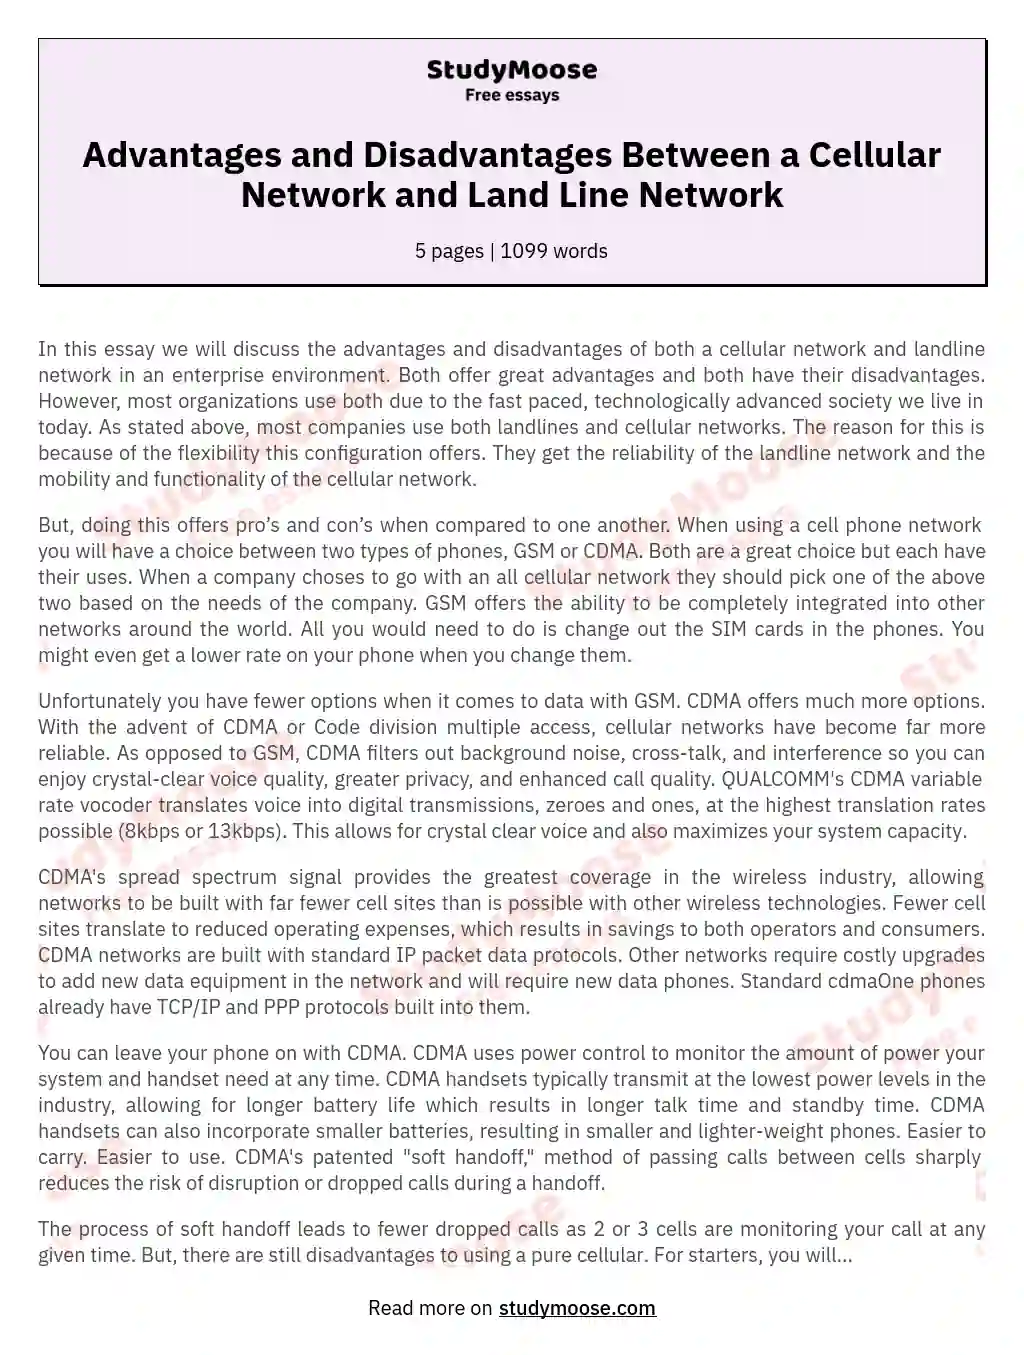 Advantages and Disadvantages Between a Cellular Network and Land Line Network